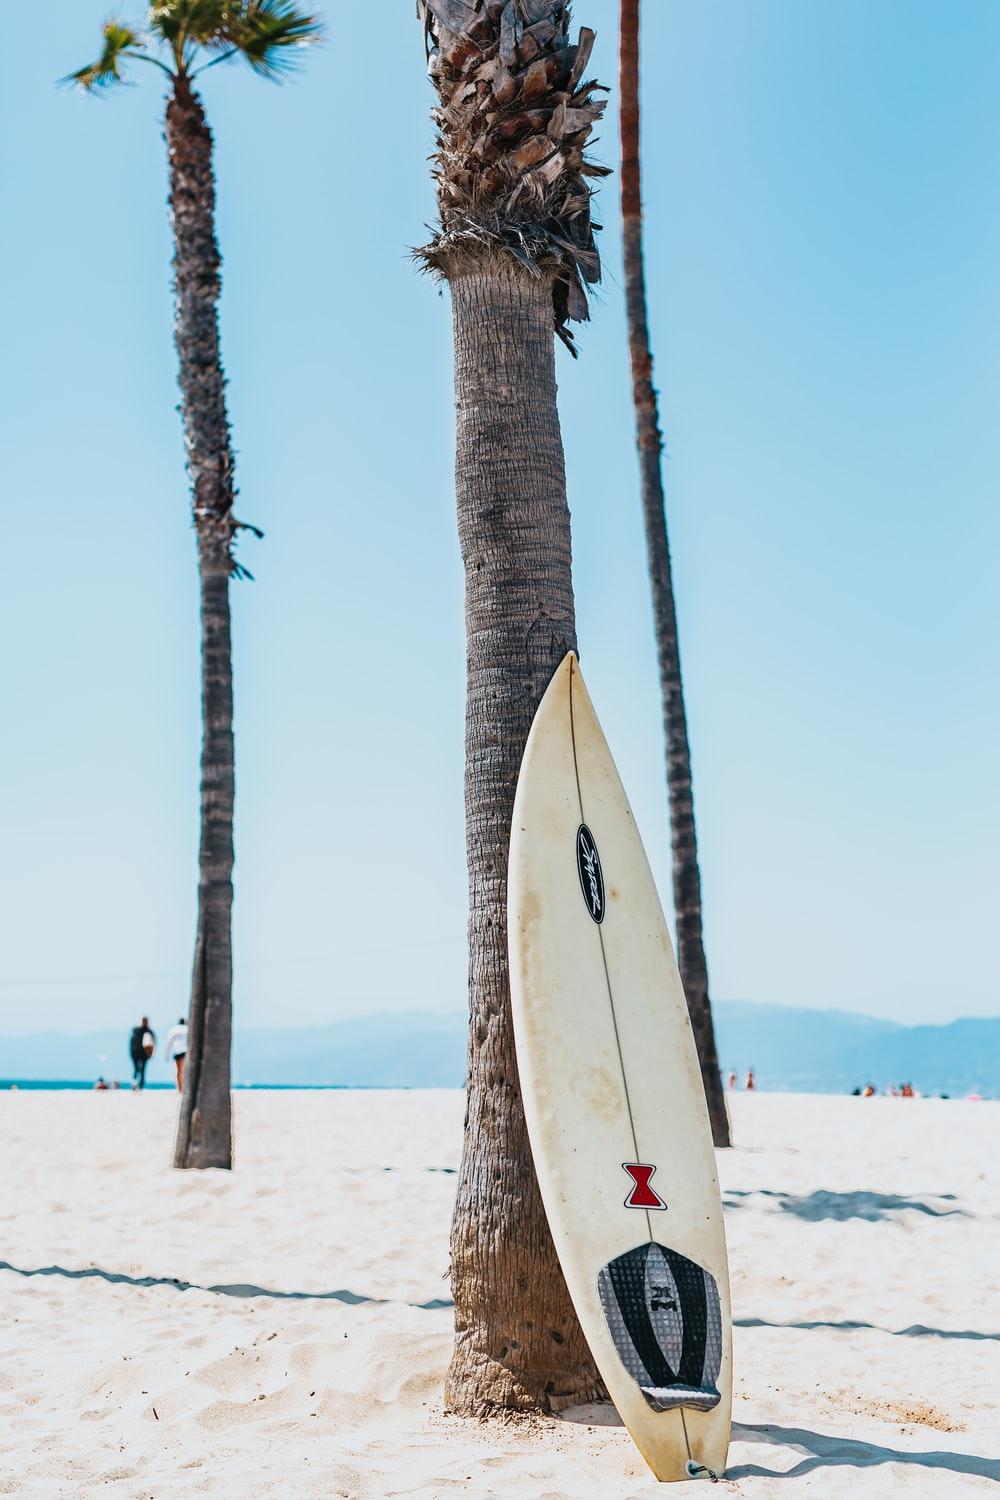 Surfer Mobile Wallpapers